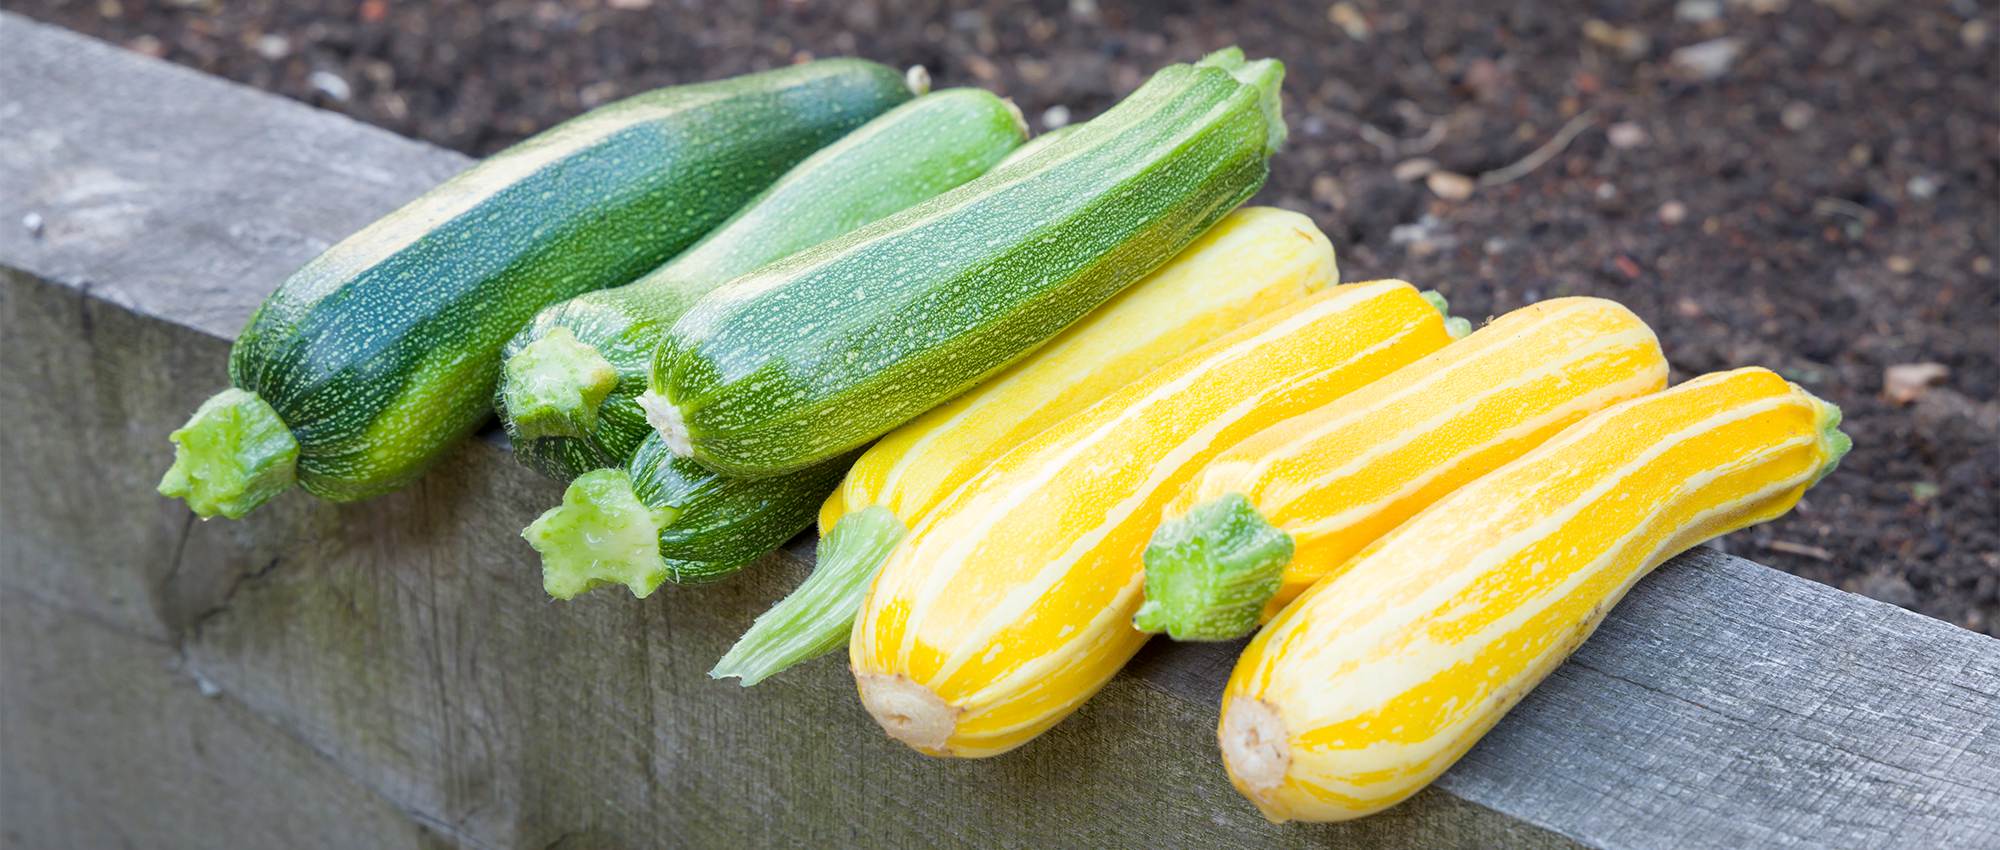 Picking Courgettes